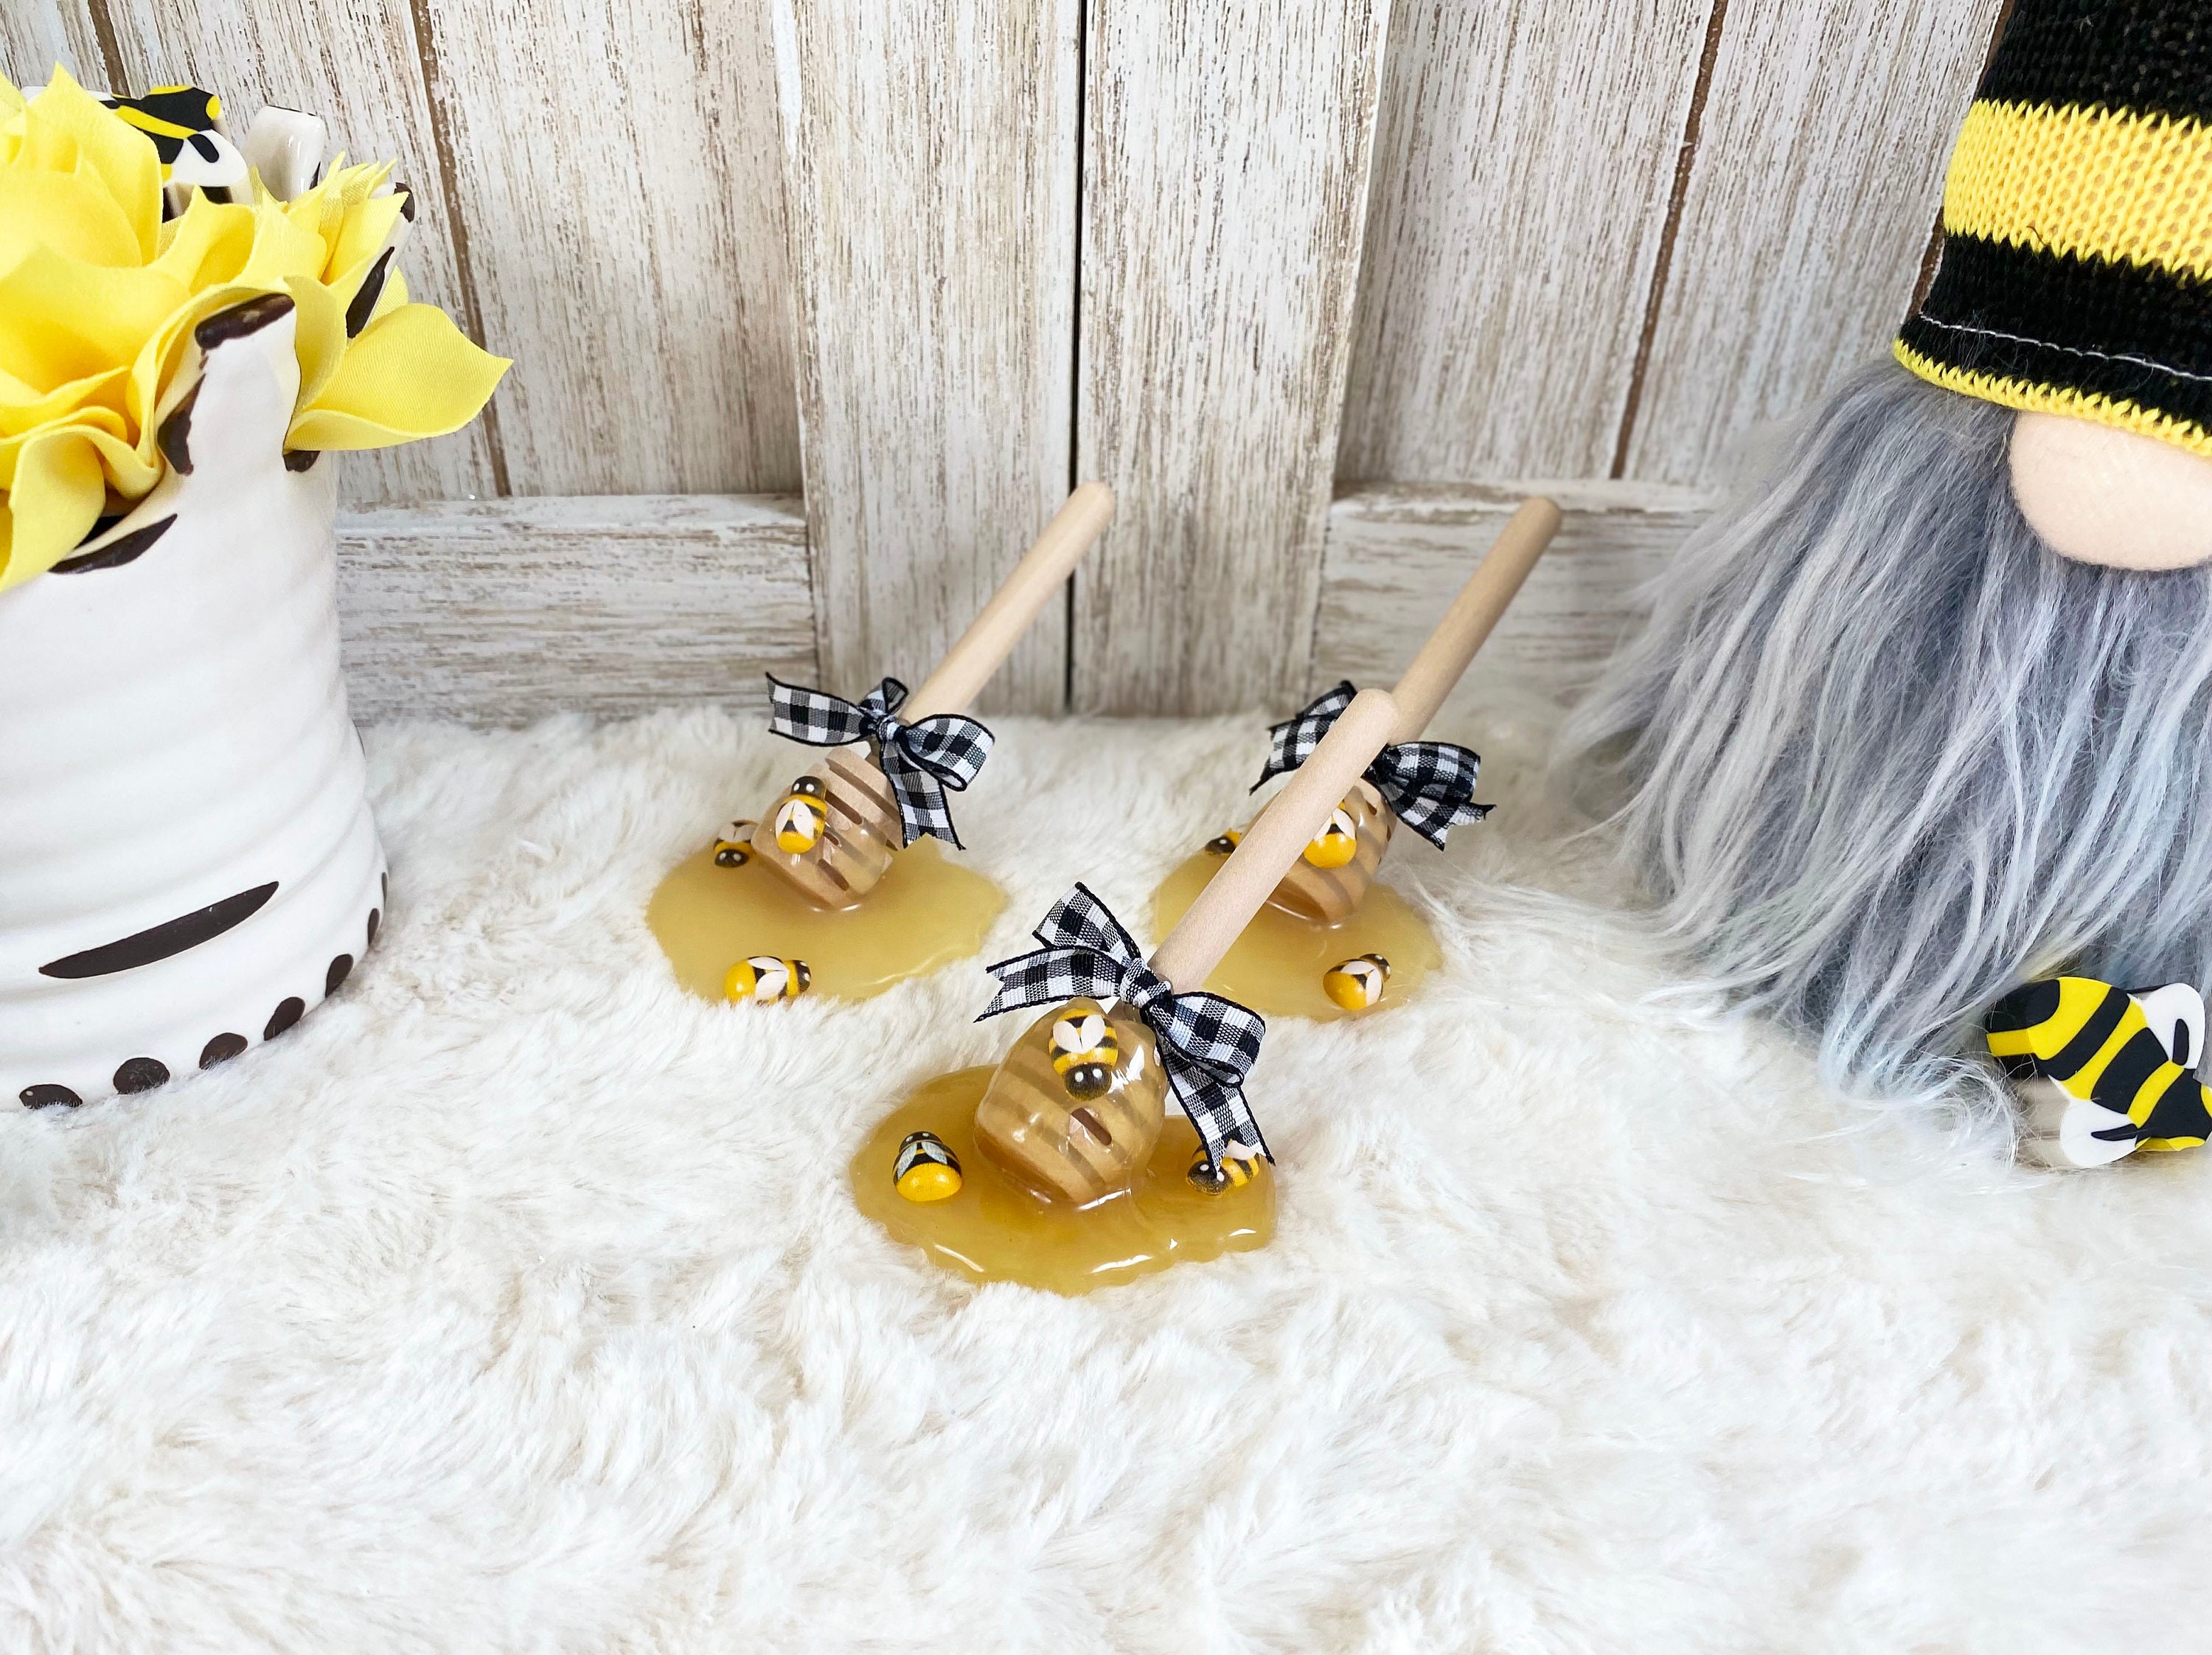 Bee Tiered Tray Decor with Wooden Fake Honey Hive Dippers Bumble Bee Gifts  fo